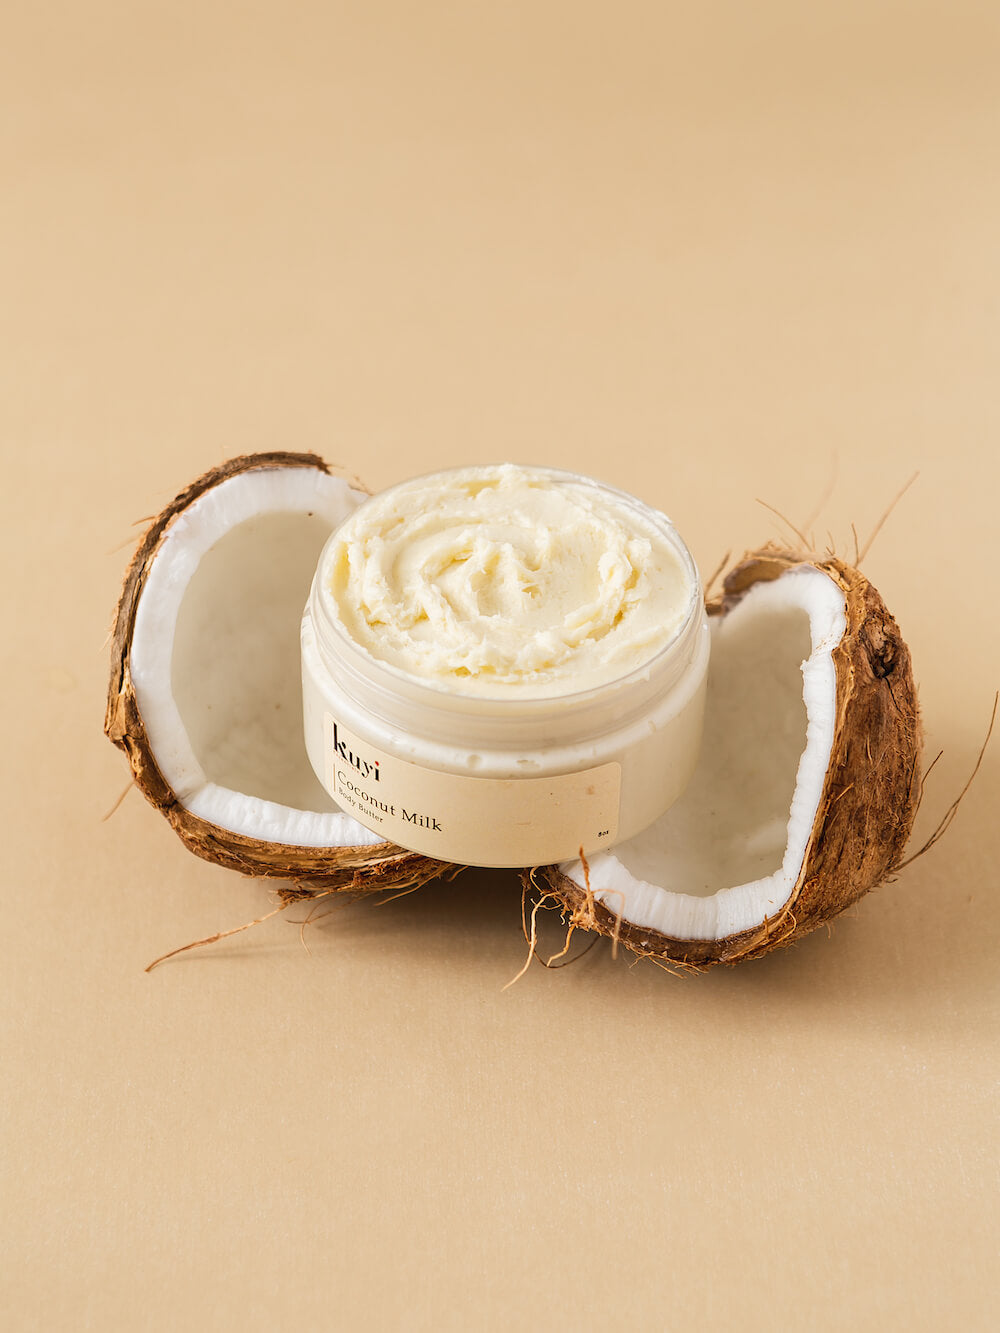 Coconut Milk Whipped Body Butter